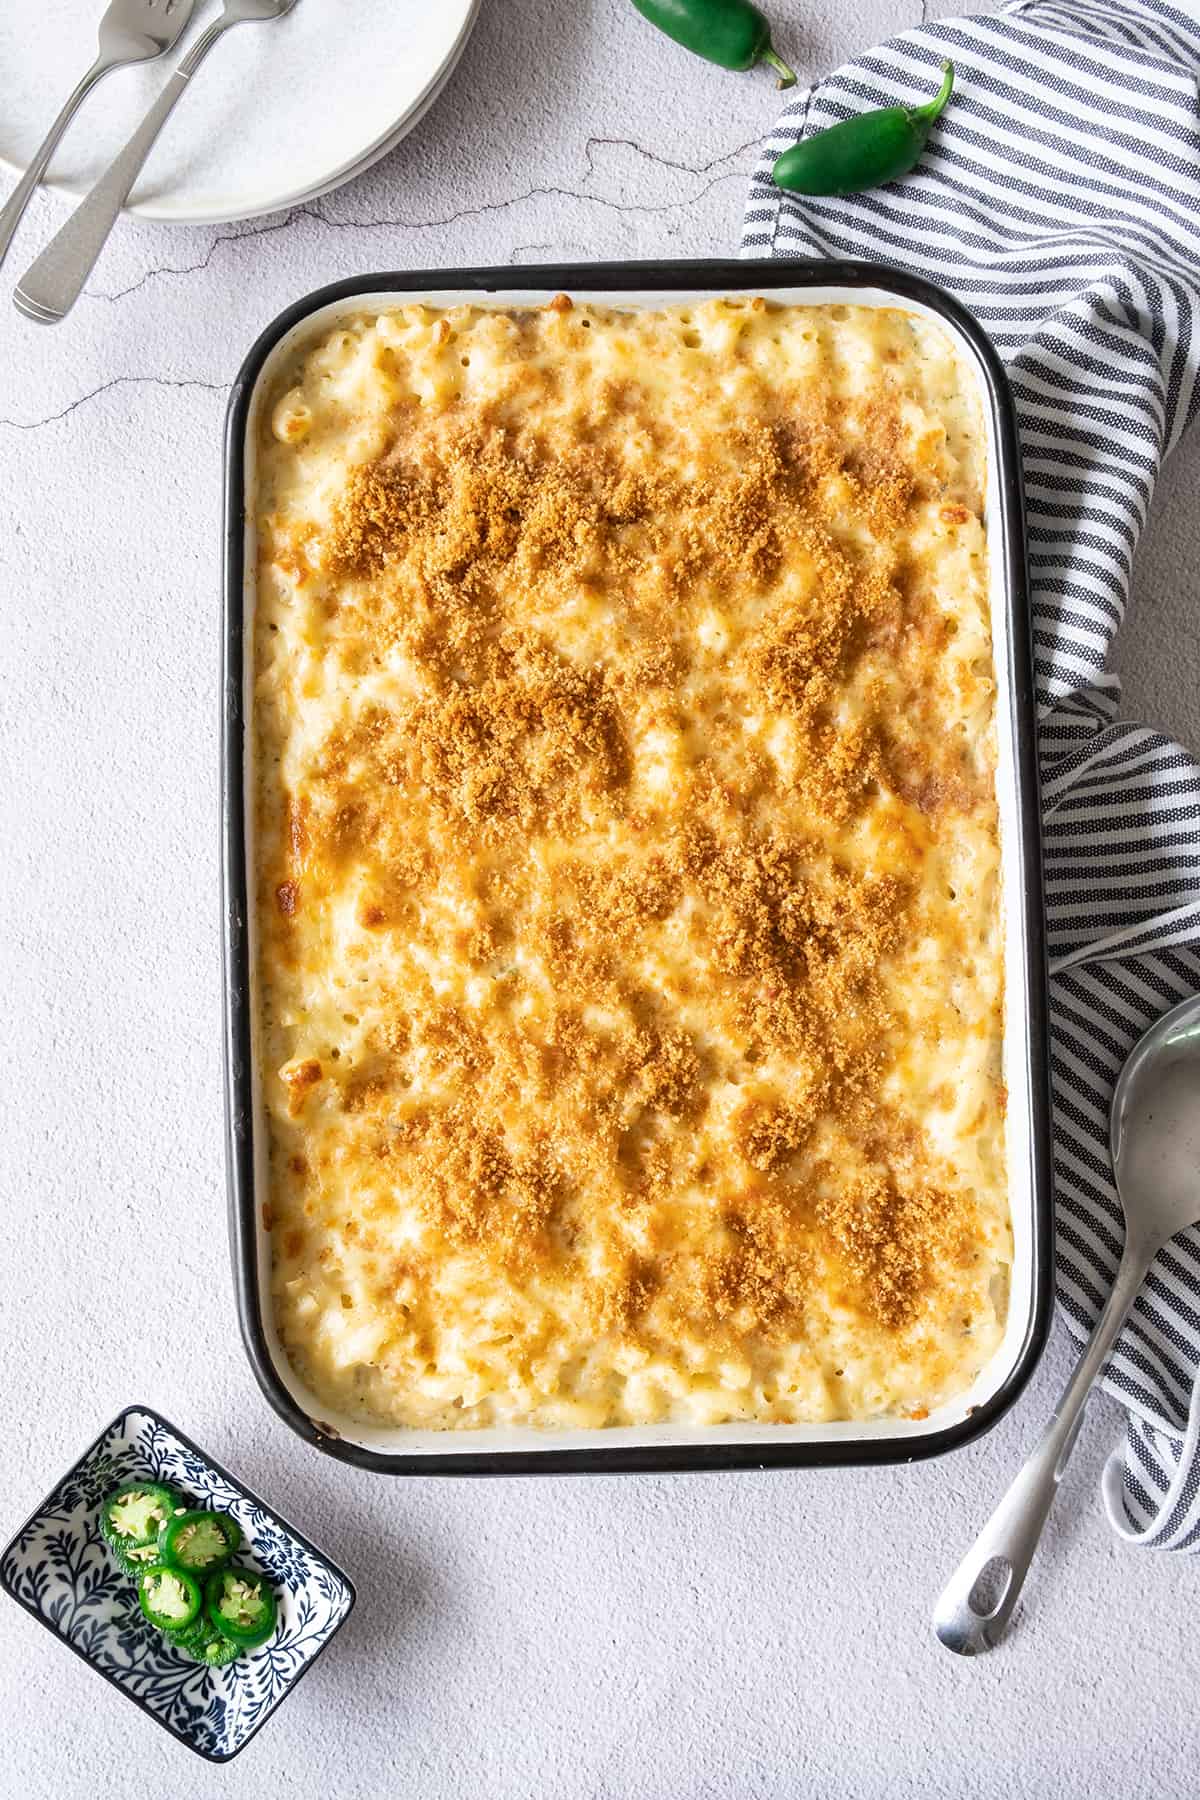 Freshly baked Mexican Mac and Cheese in a baking dish.